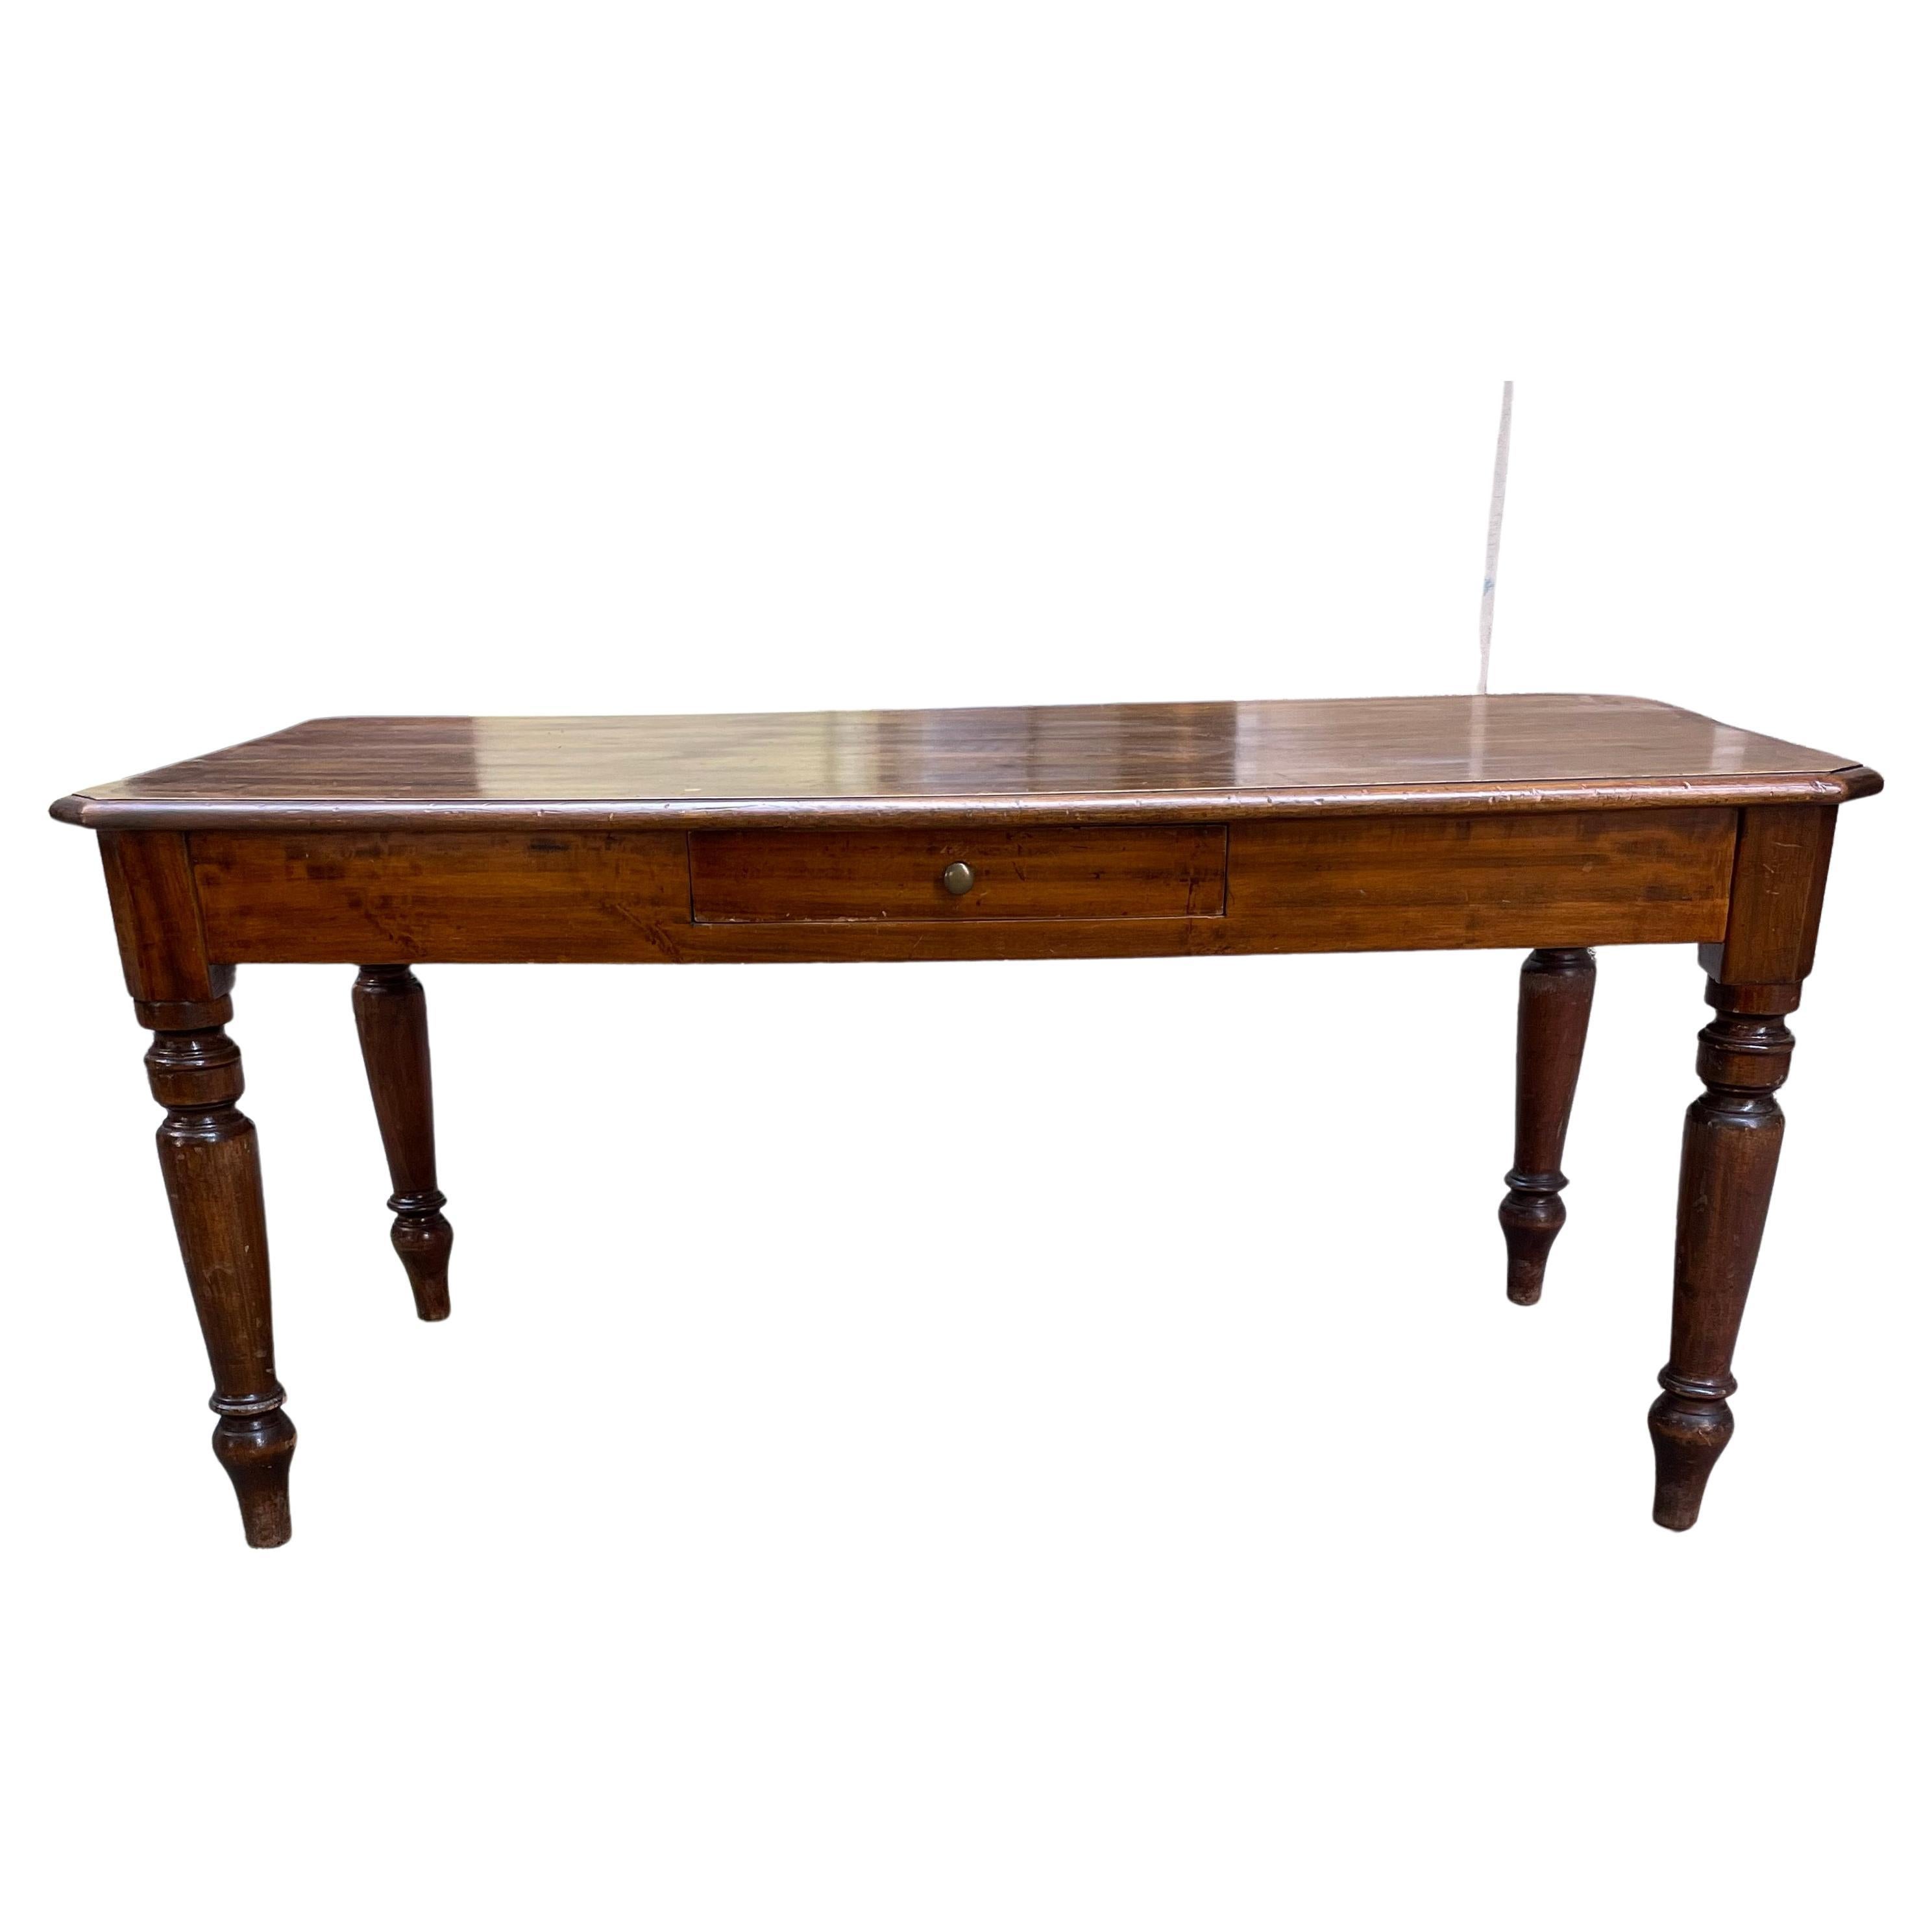 19th century Italian Lombard dining room center table made of solid poplar, rectangular top with shaped edges, one  drawer on the long side, turned legs.
In good condition, this antique Italian table dates back to the second half of 19th century.,  